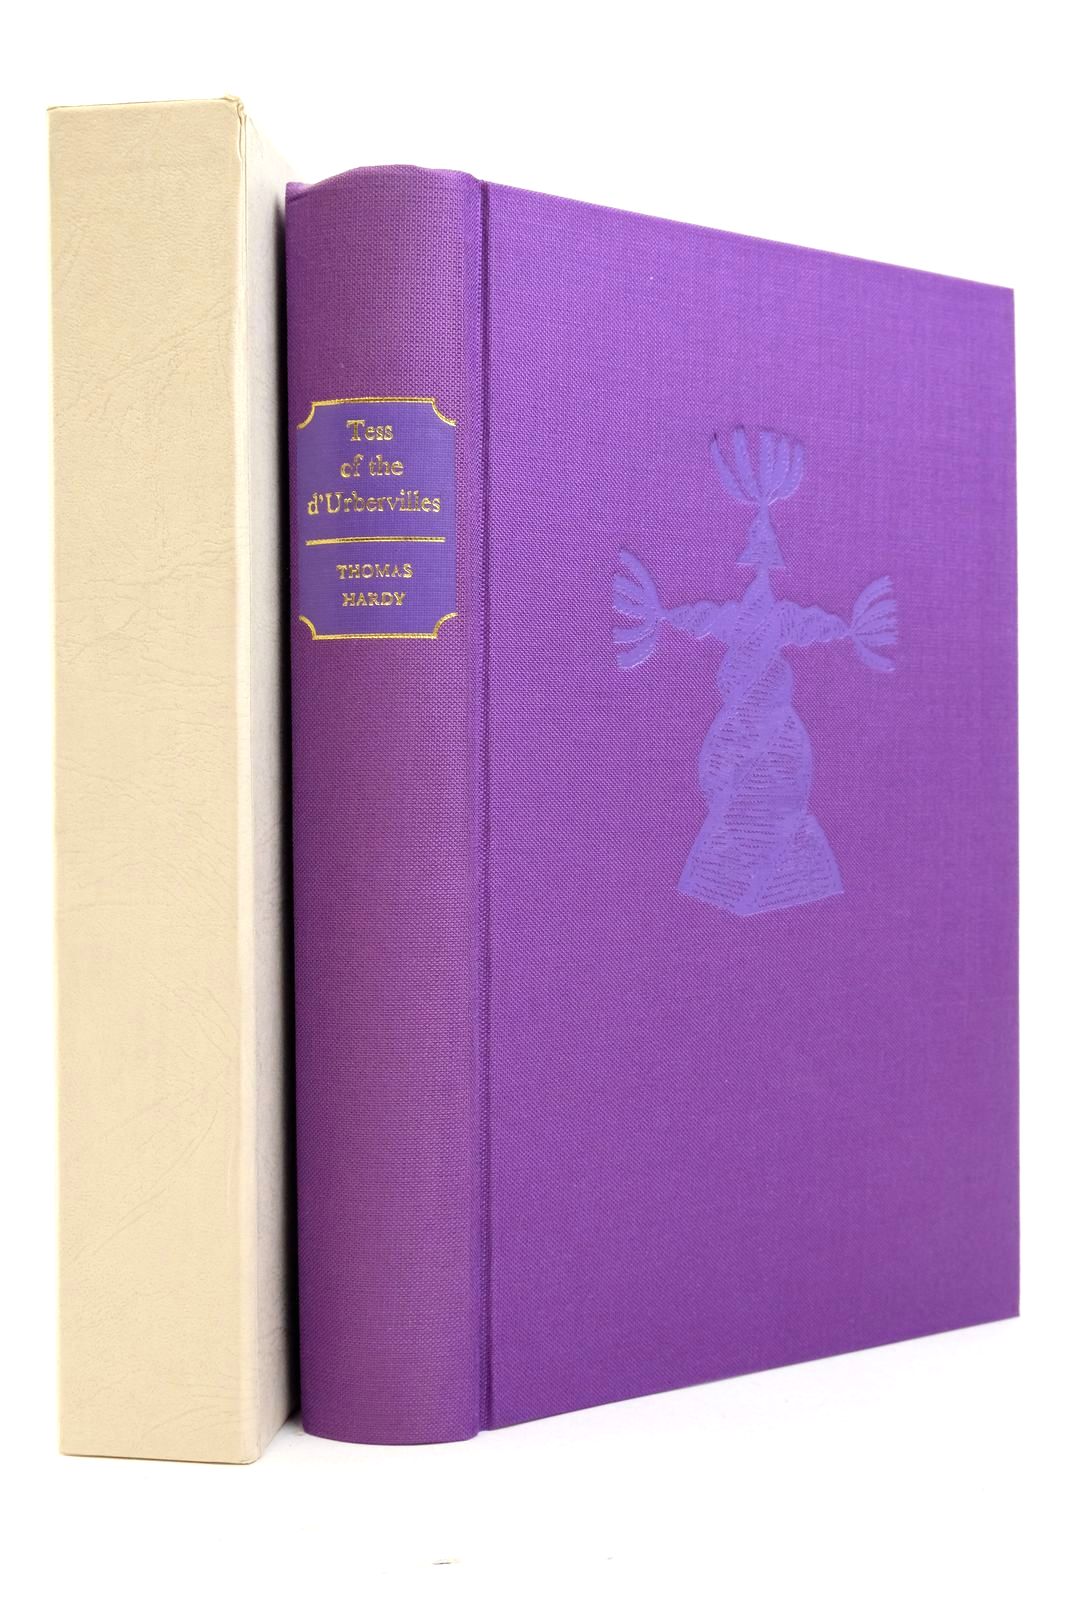 Photo of TESS OF THE D'URBERVILLES written by Hardy, Thomas illustrated by Reddick, Peter published by Folio Society (STOCK CODE: 2138220)  for sale by Stella & Rose's Books